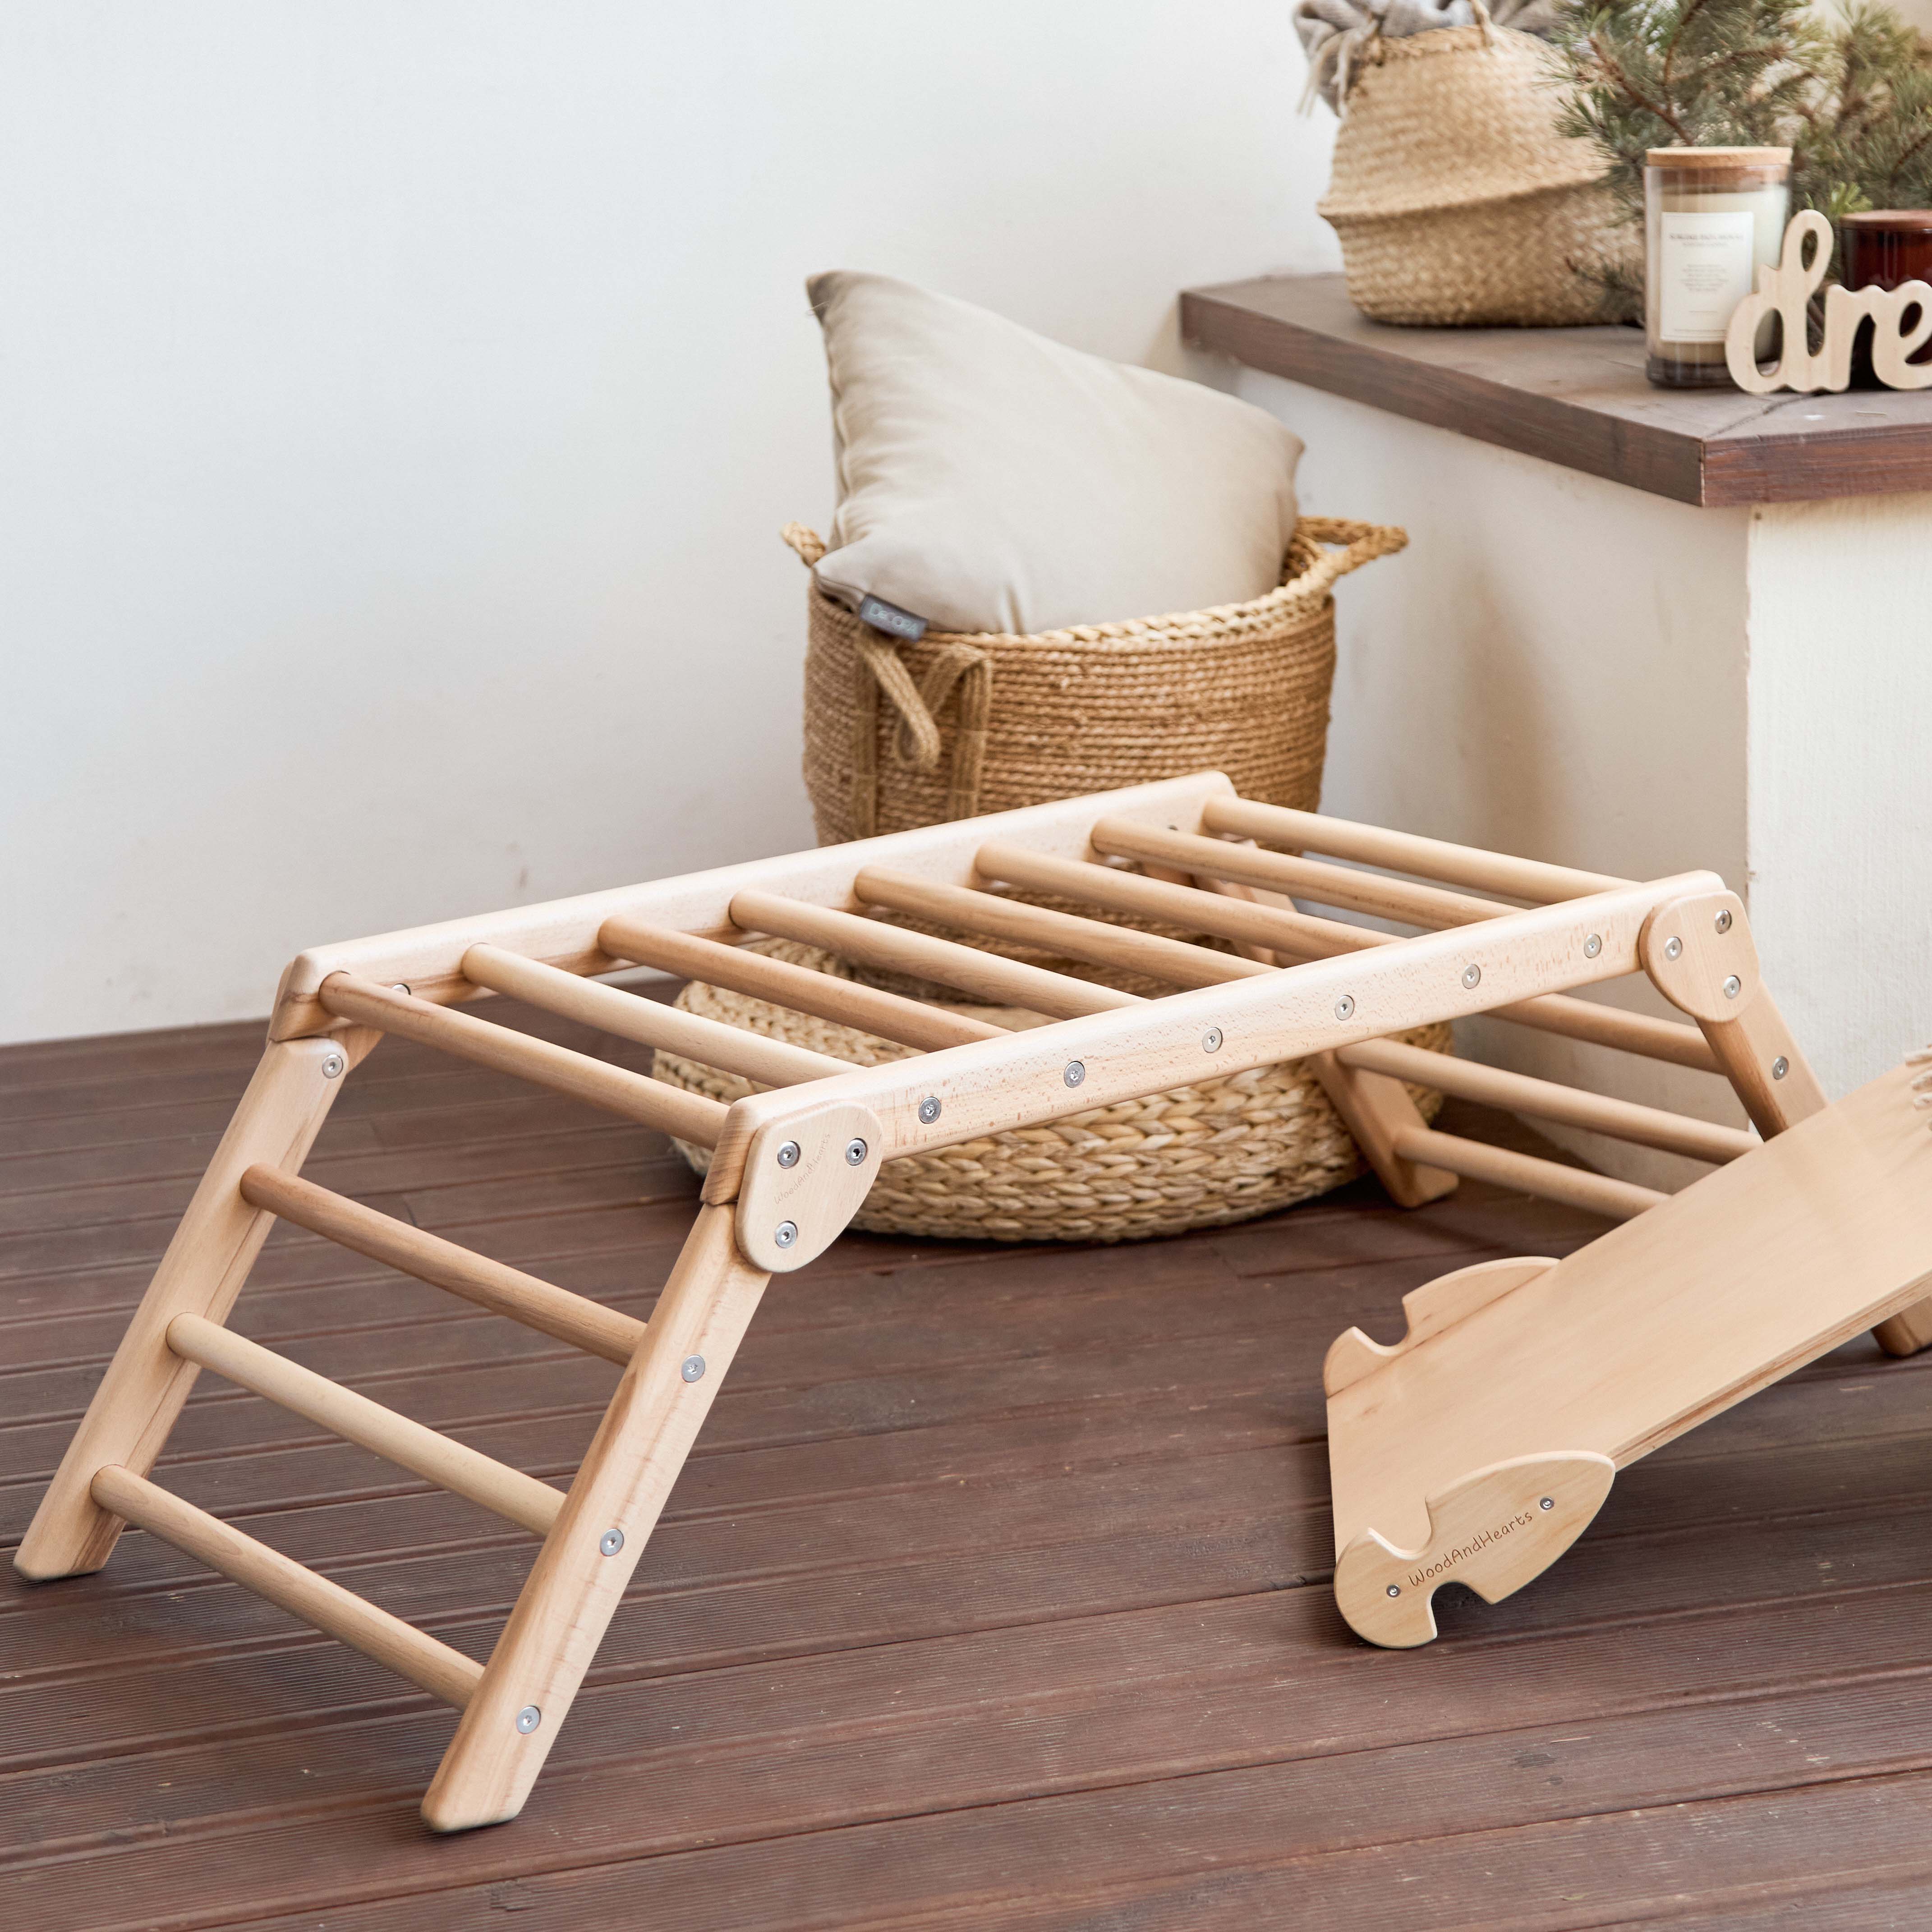 Wooden Scandinavian 2in1 Set for Climbing, Trapeze Arch+Two-Sided Ramp, N.Wood color